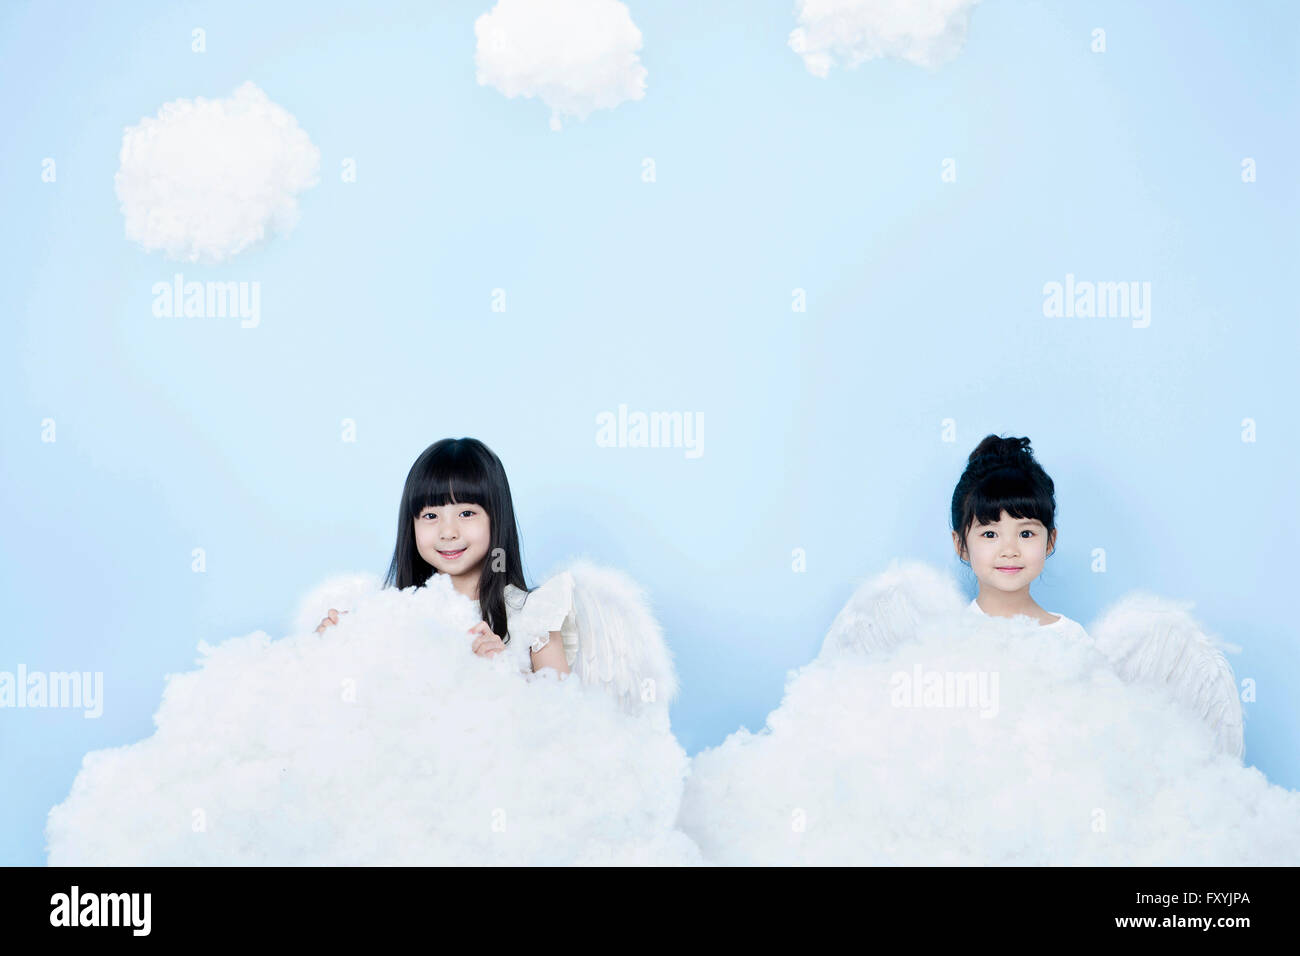 Two girls in angel costume behind clouds in the background representing heaven Stock Photo